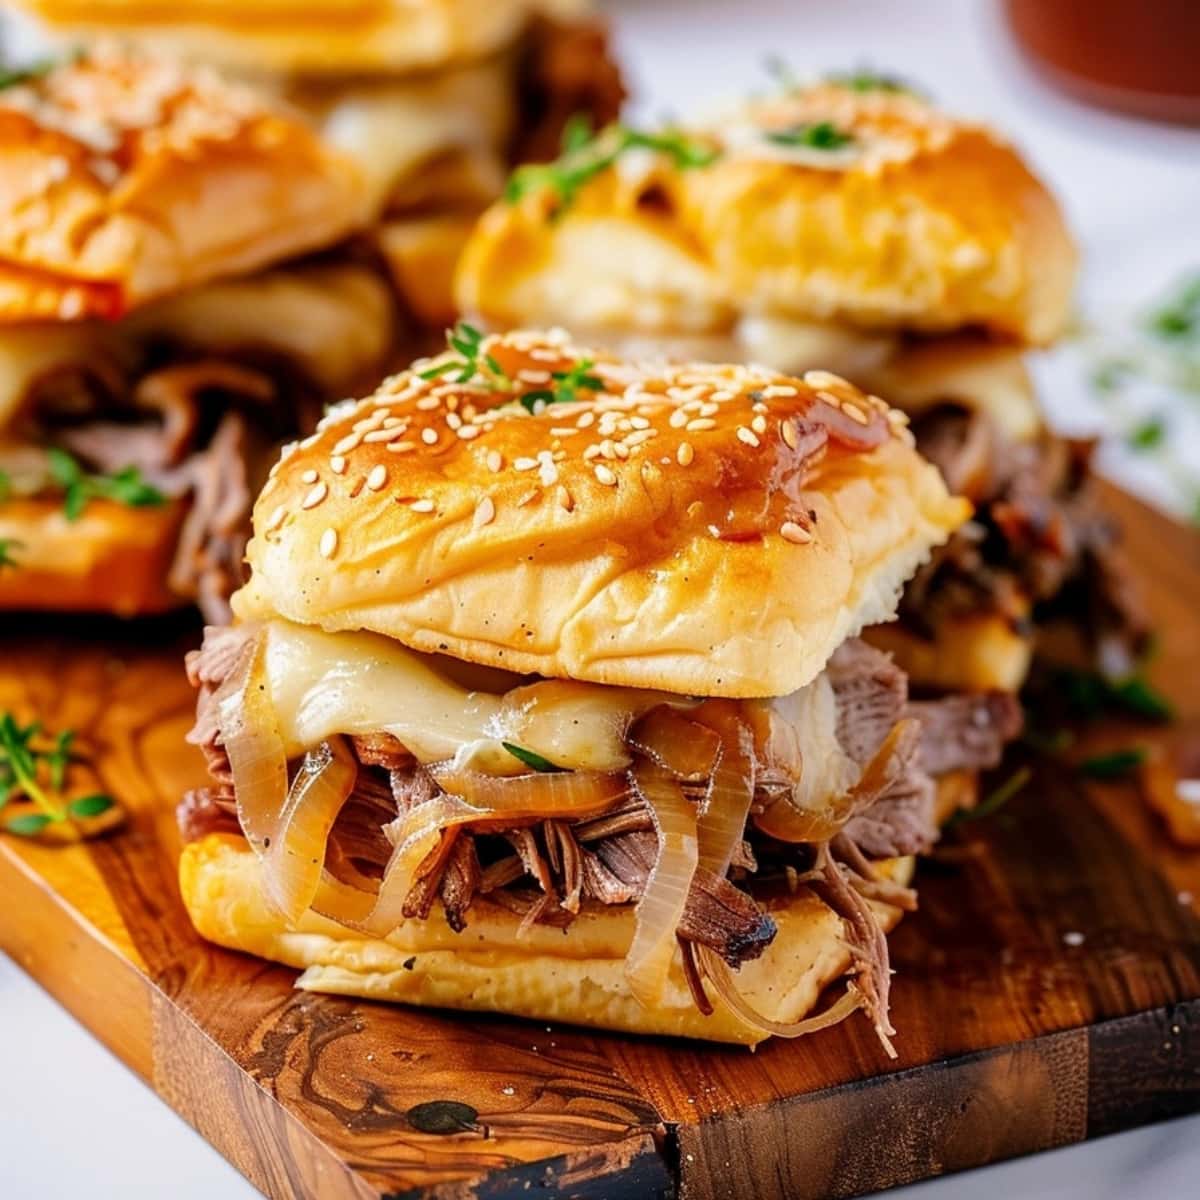 French dip sliders with roast beef and caramelized onions on a wooden board